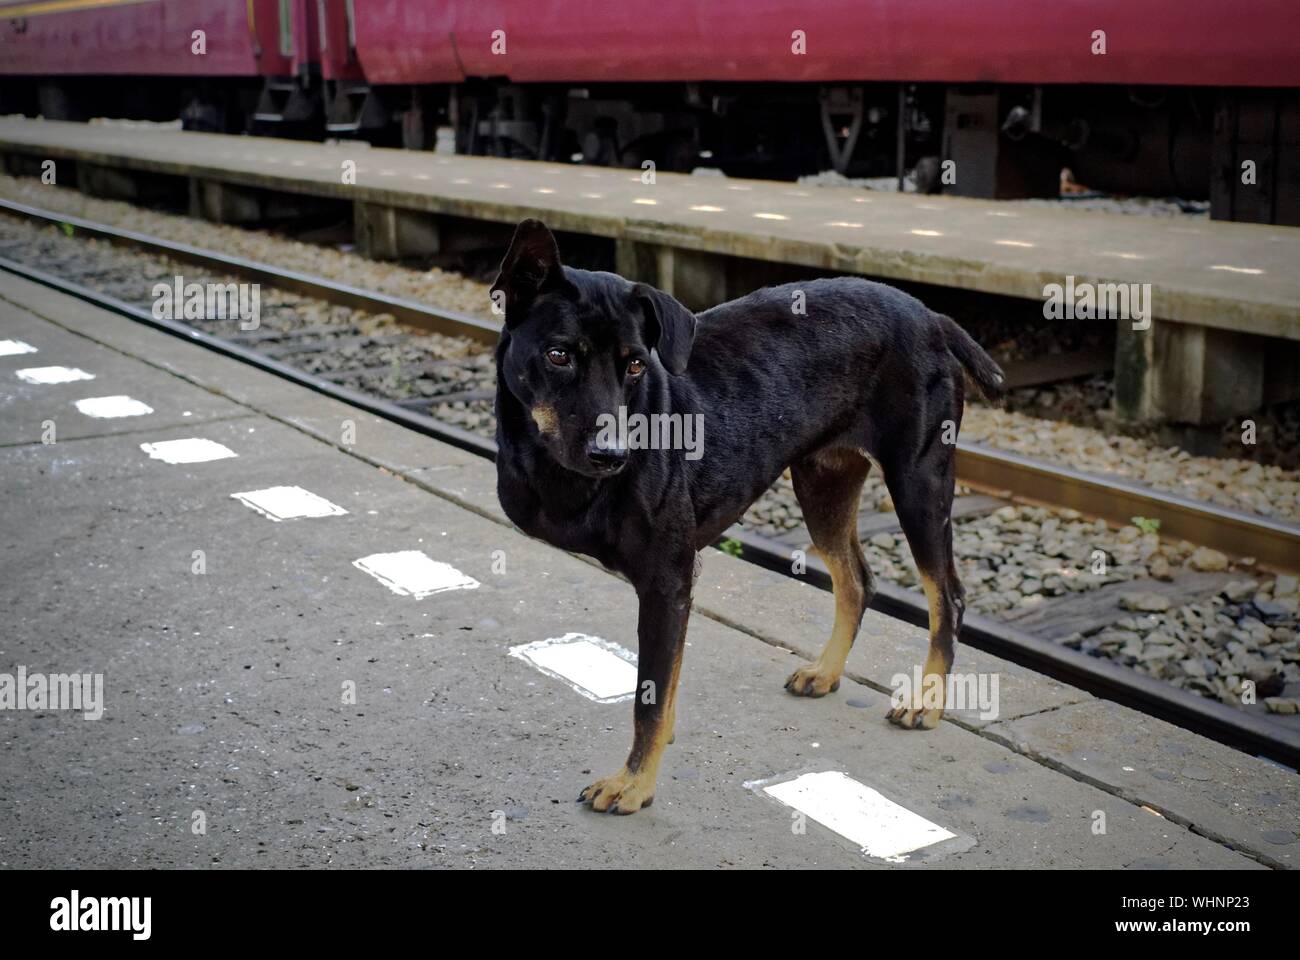 Physically Impaired Dog Standing At Railroad Station Platform Stock Photo